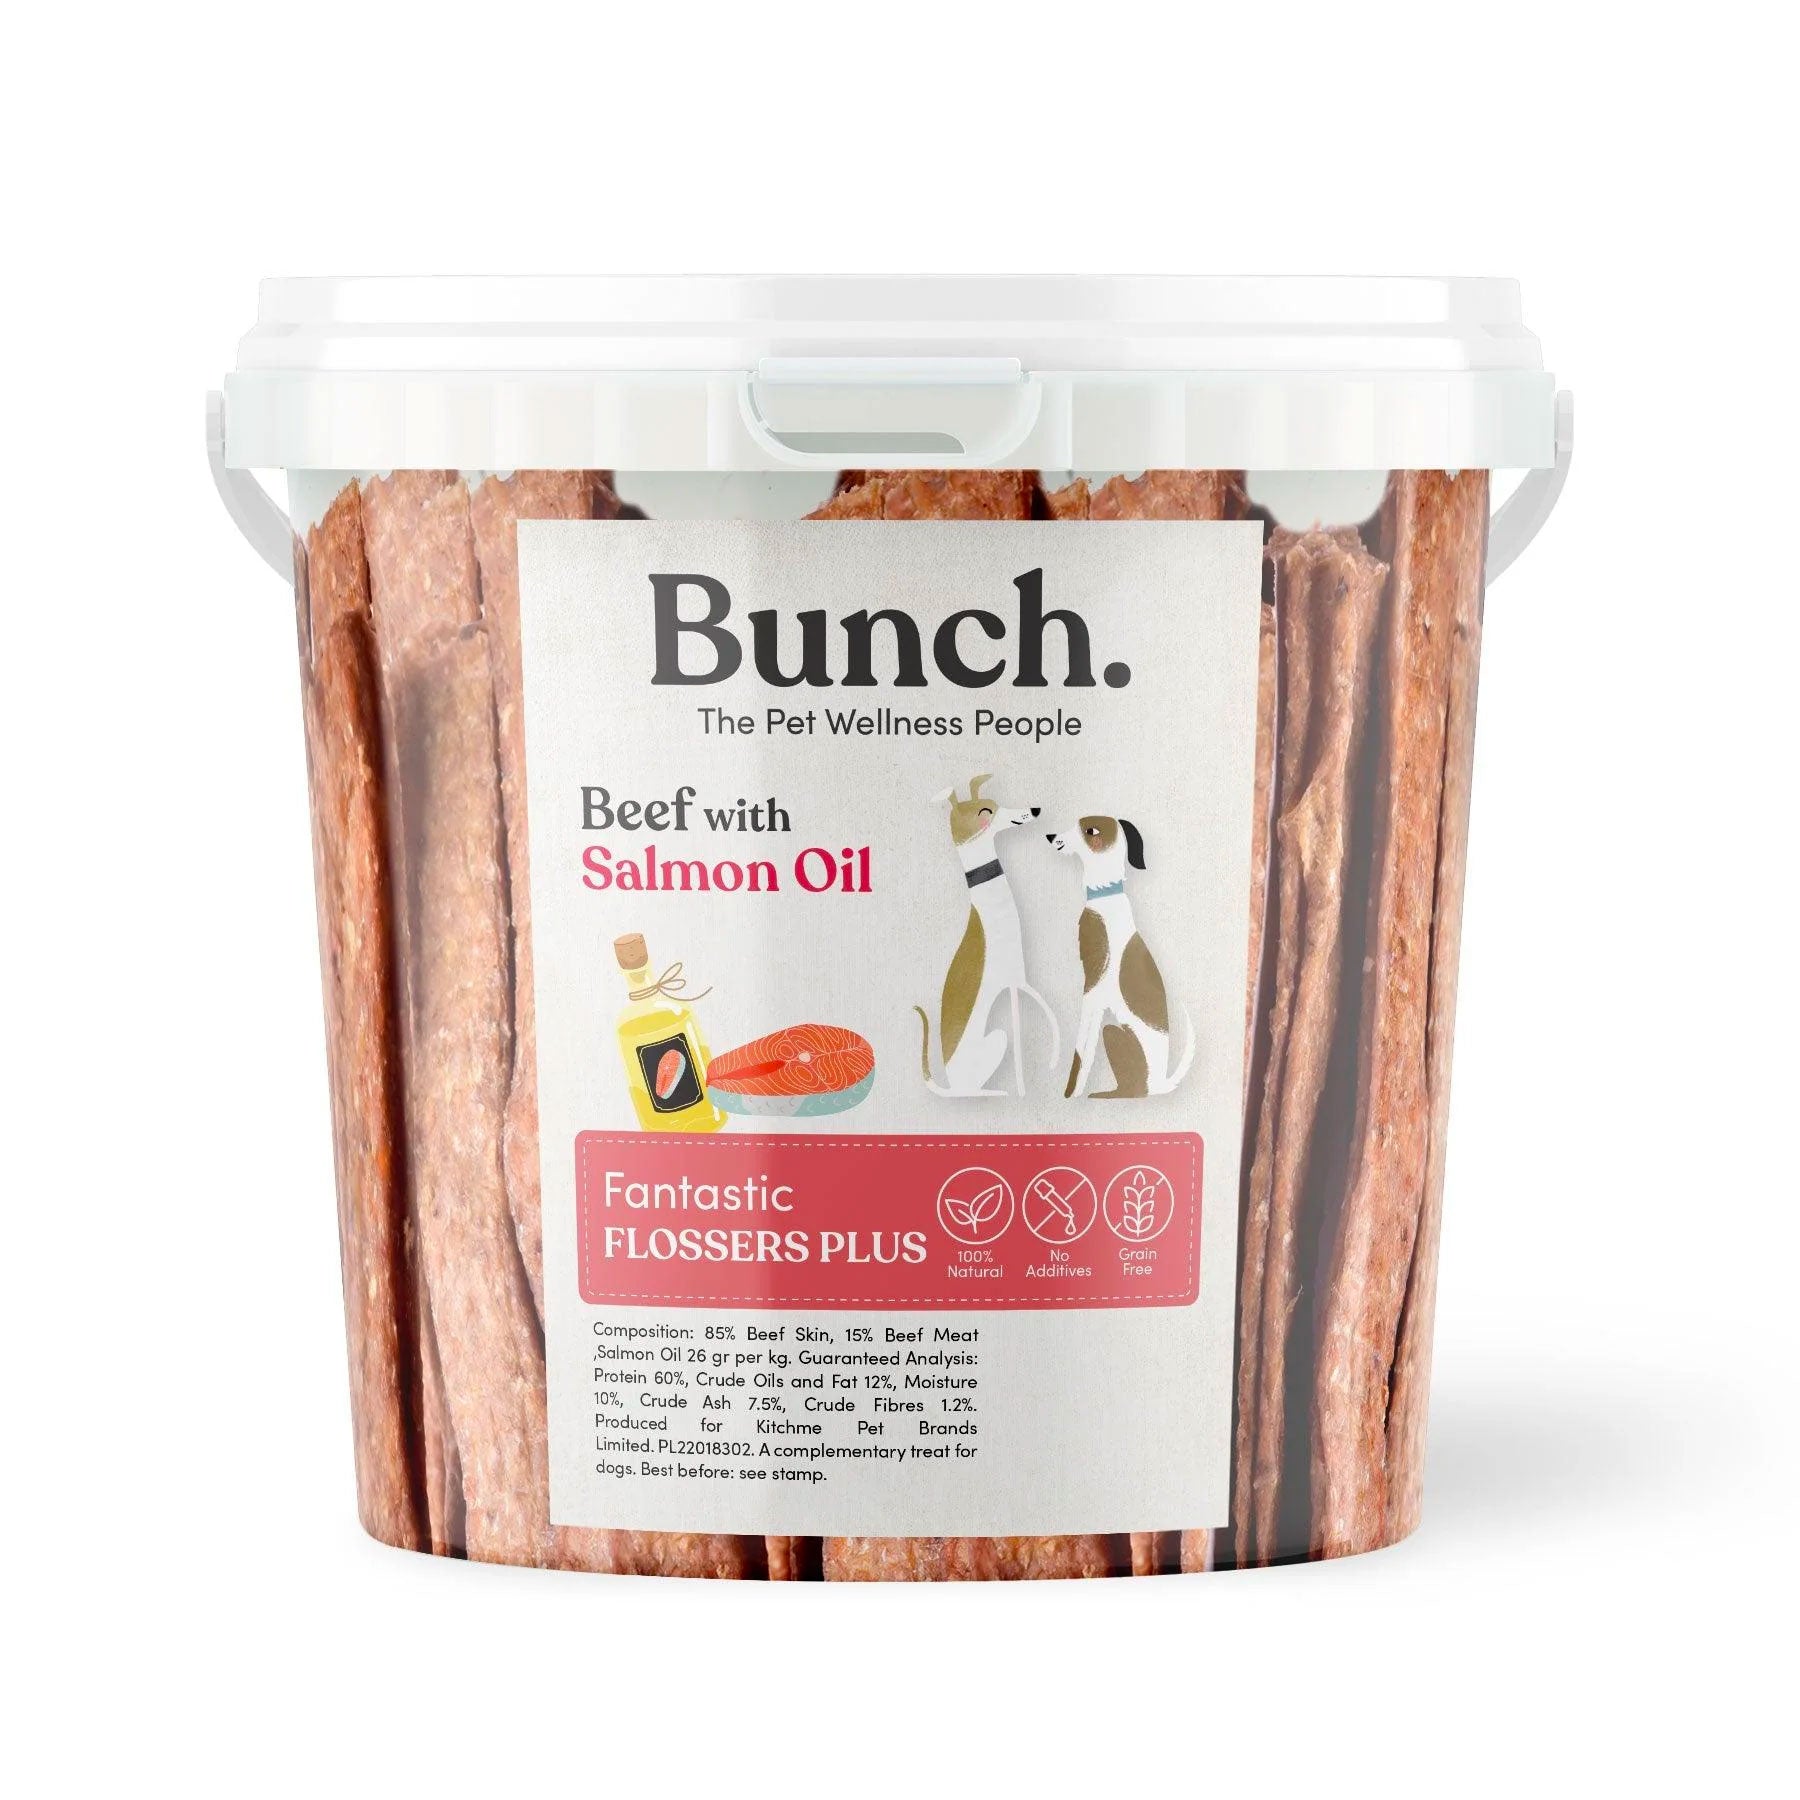 Vital Chewing Sticks with Beef and Salmon oil by Bunch (500g-Bucket)